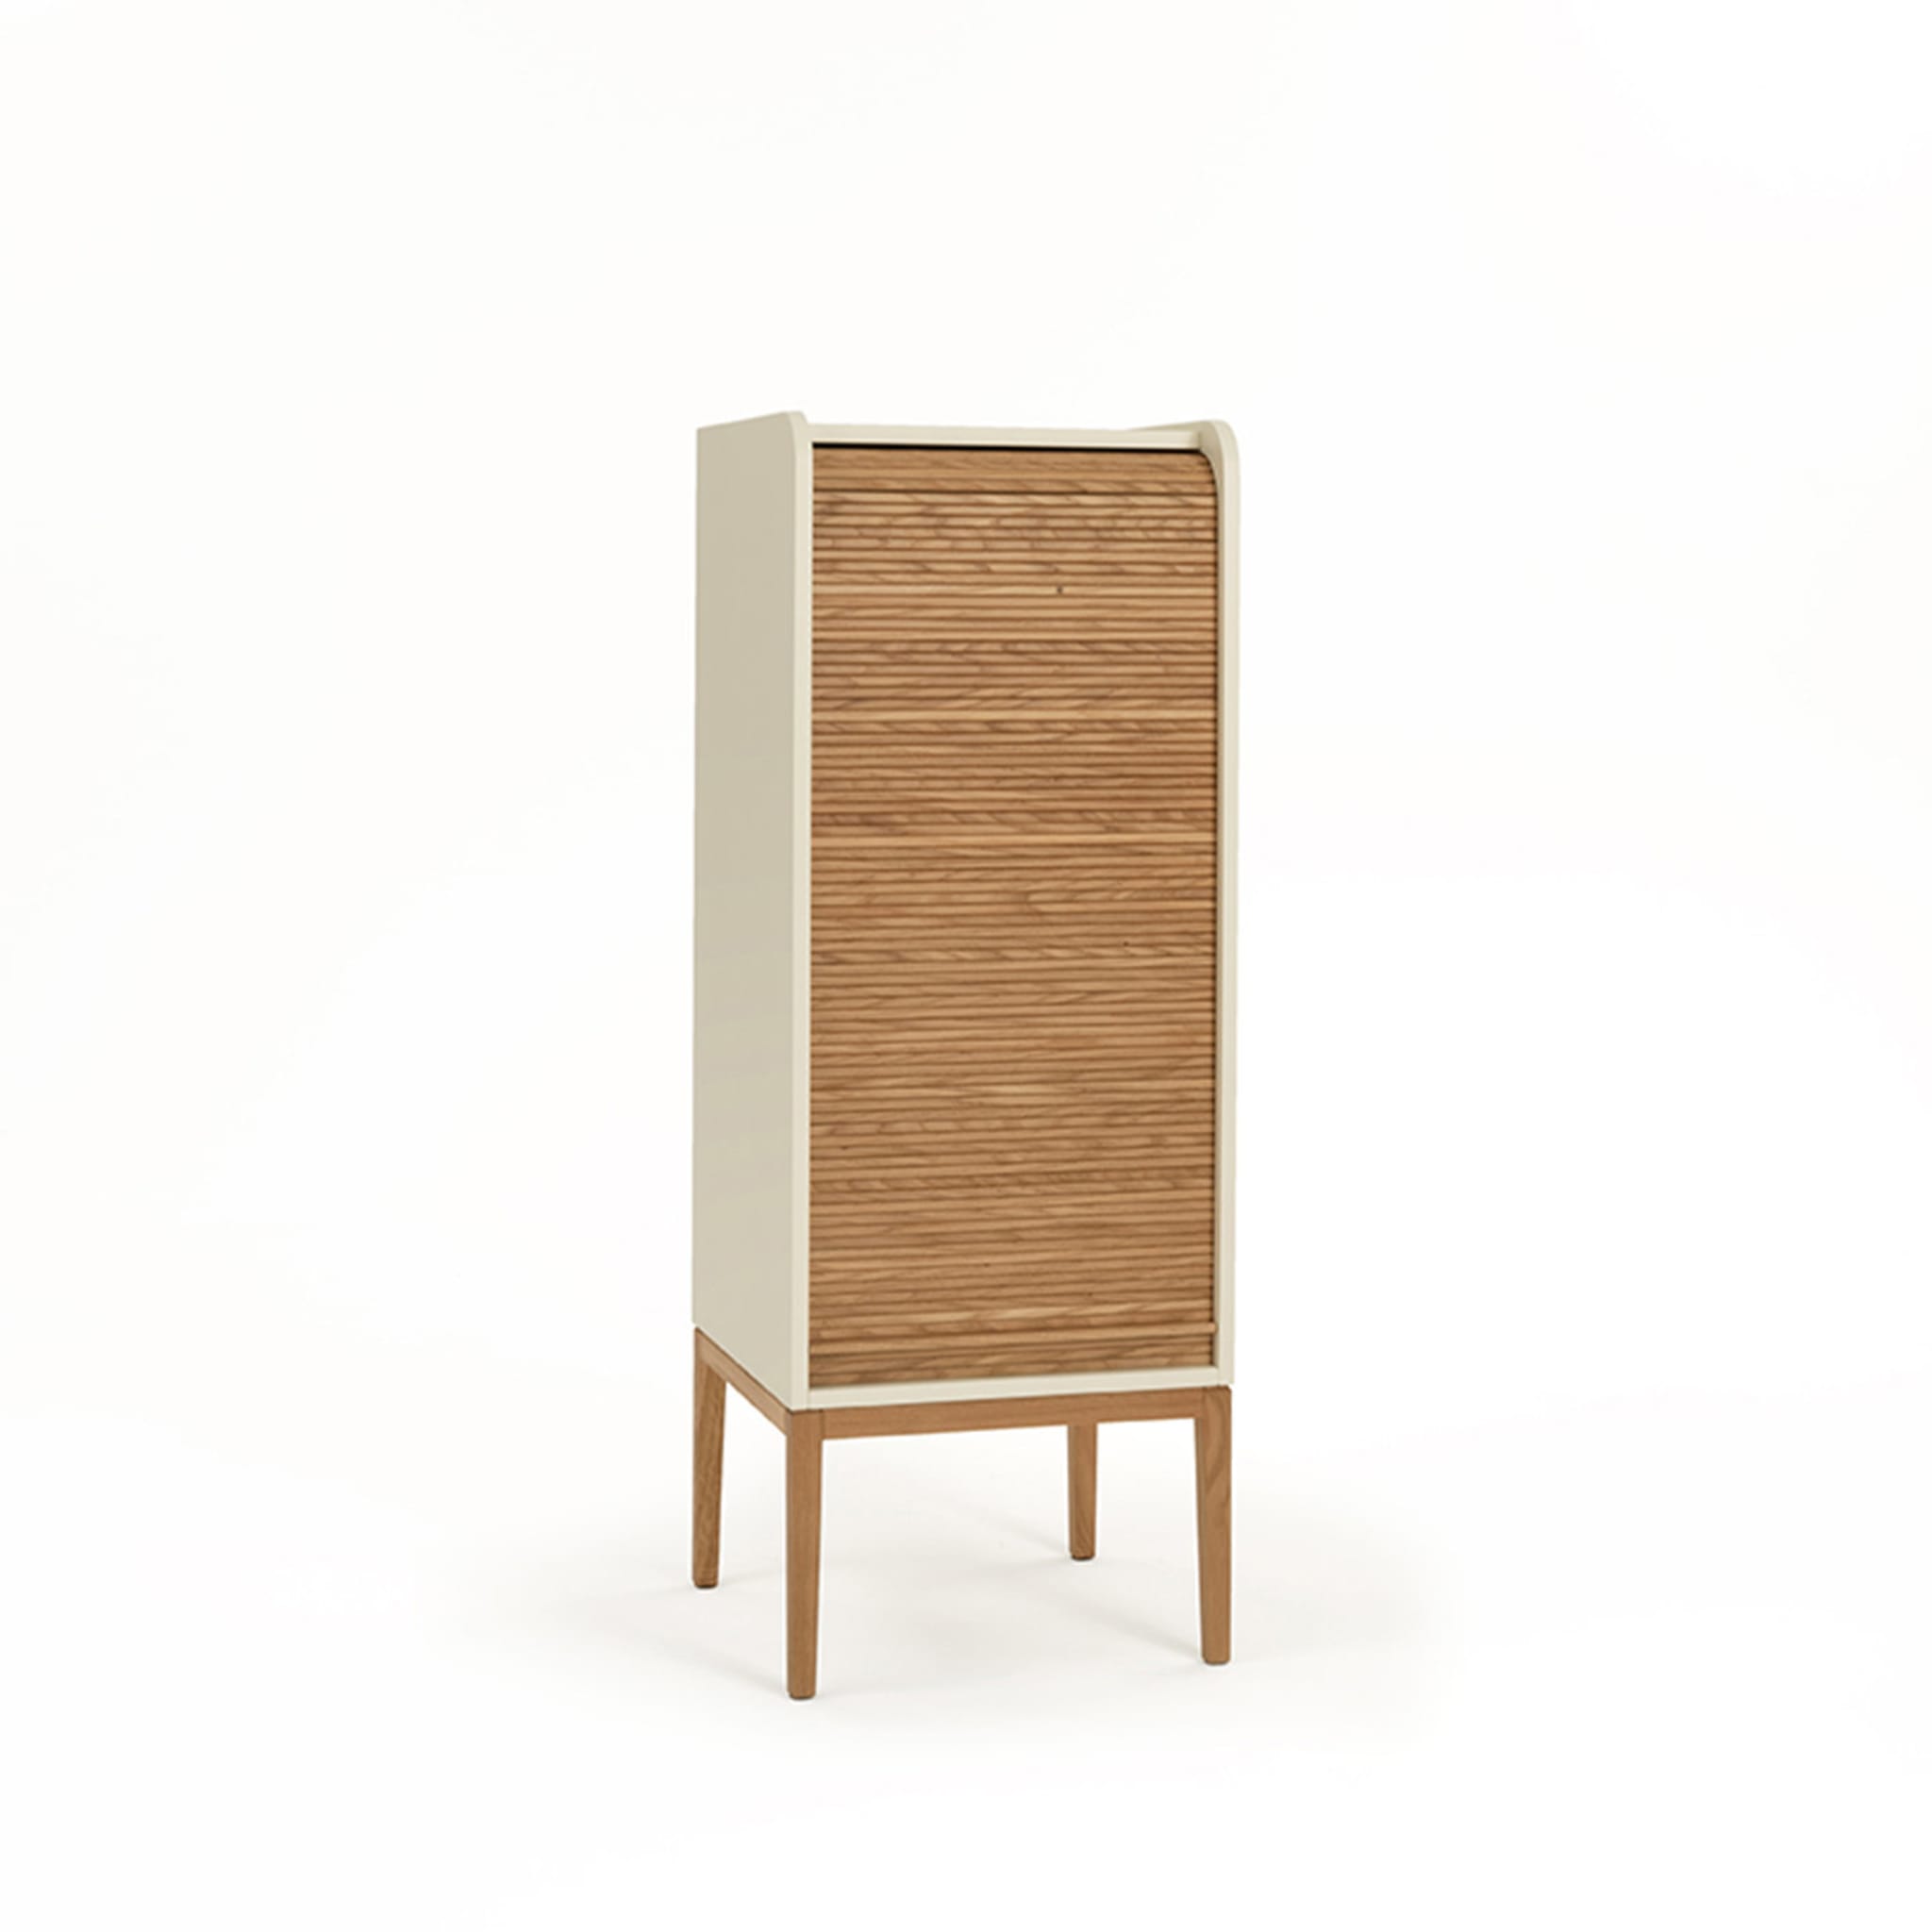 Tapparelle White Cabinet by Emmanuel Gallina - Alternative view 1